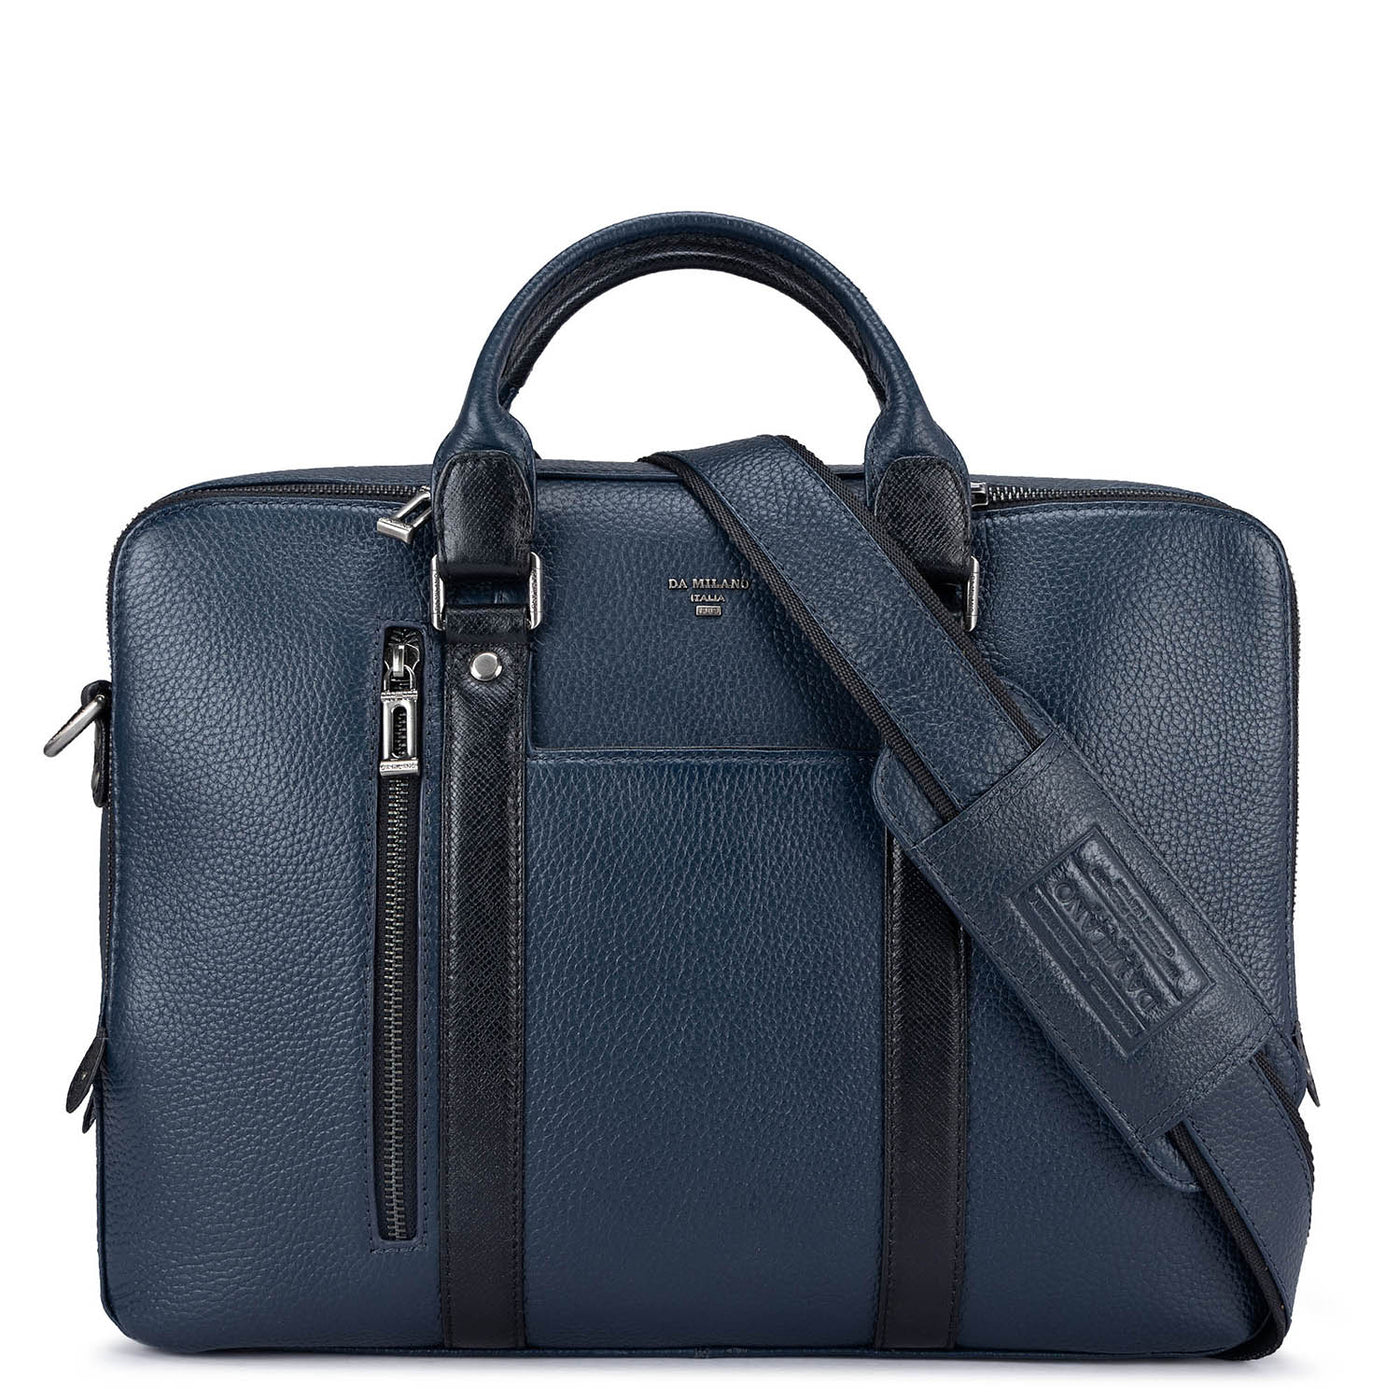 Navy Wax Leather Laptop Bag - Upto 14"